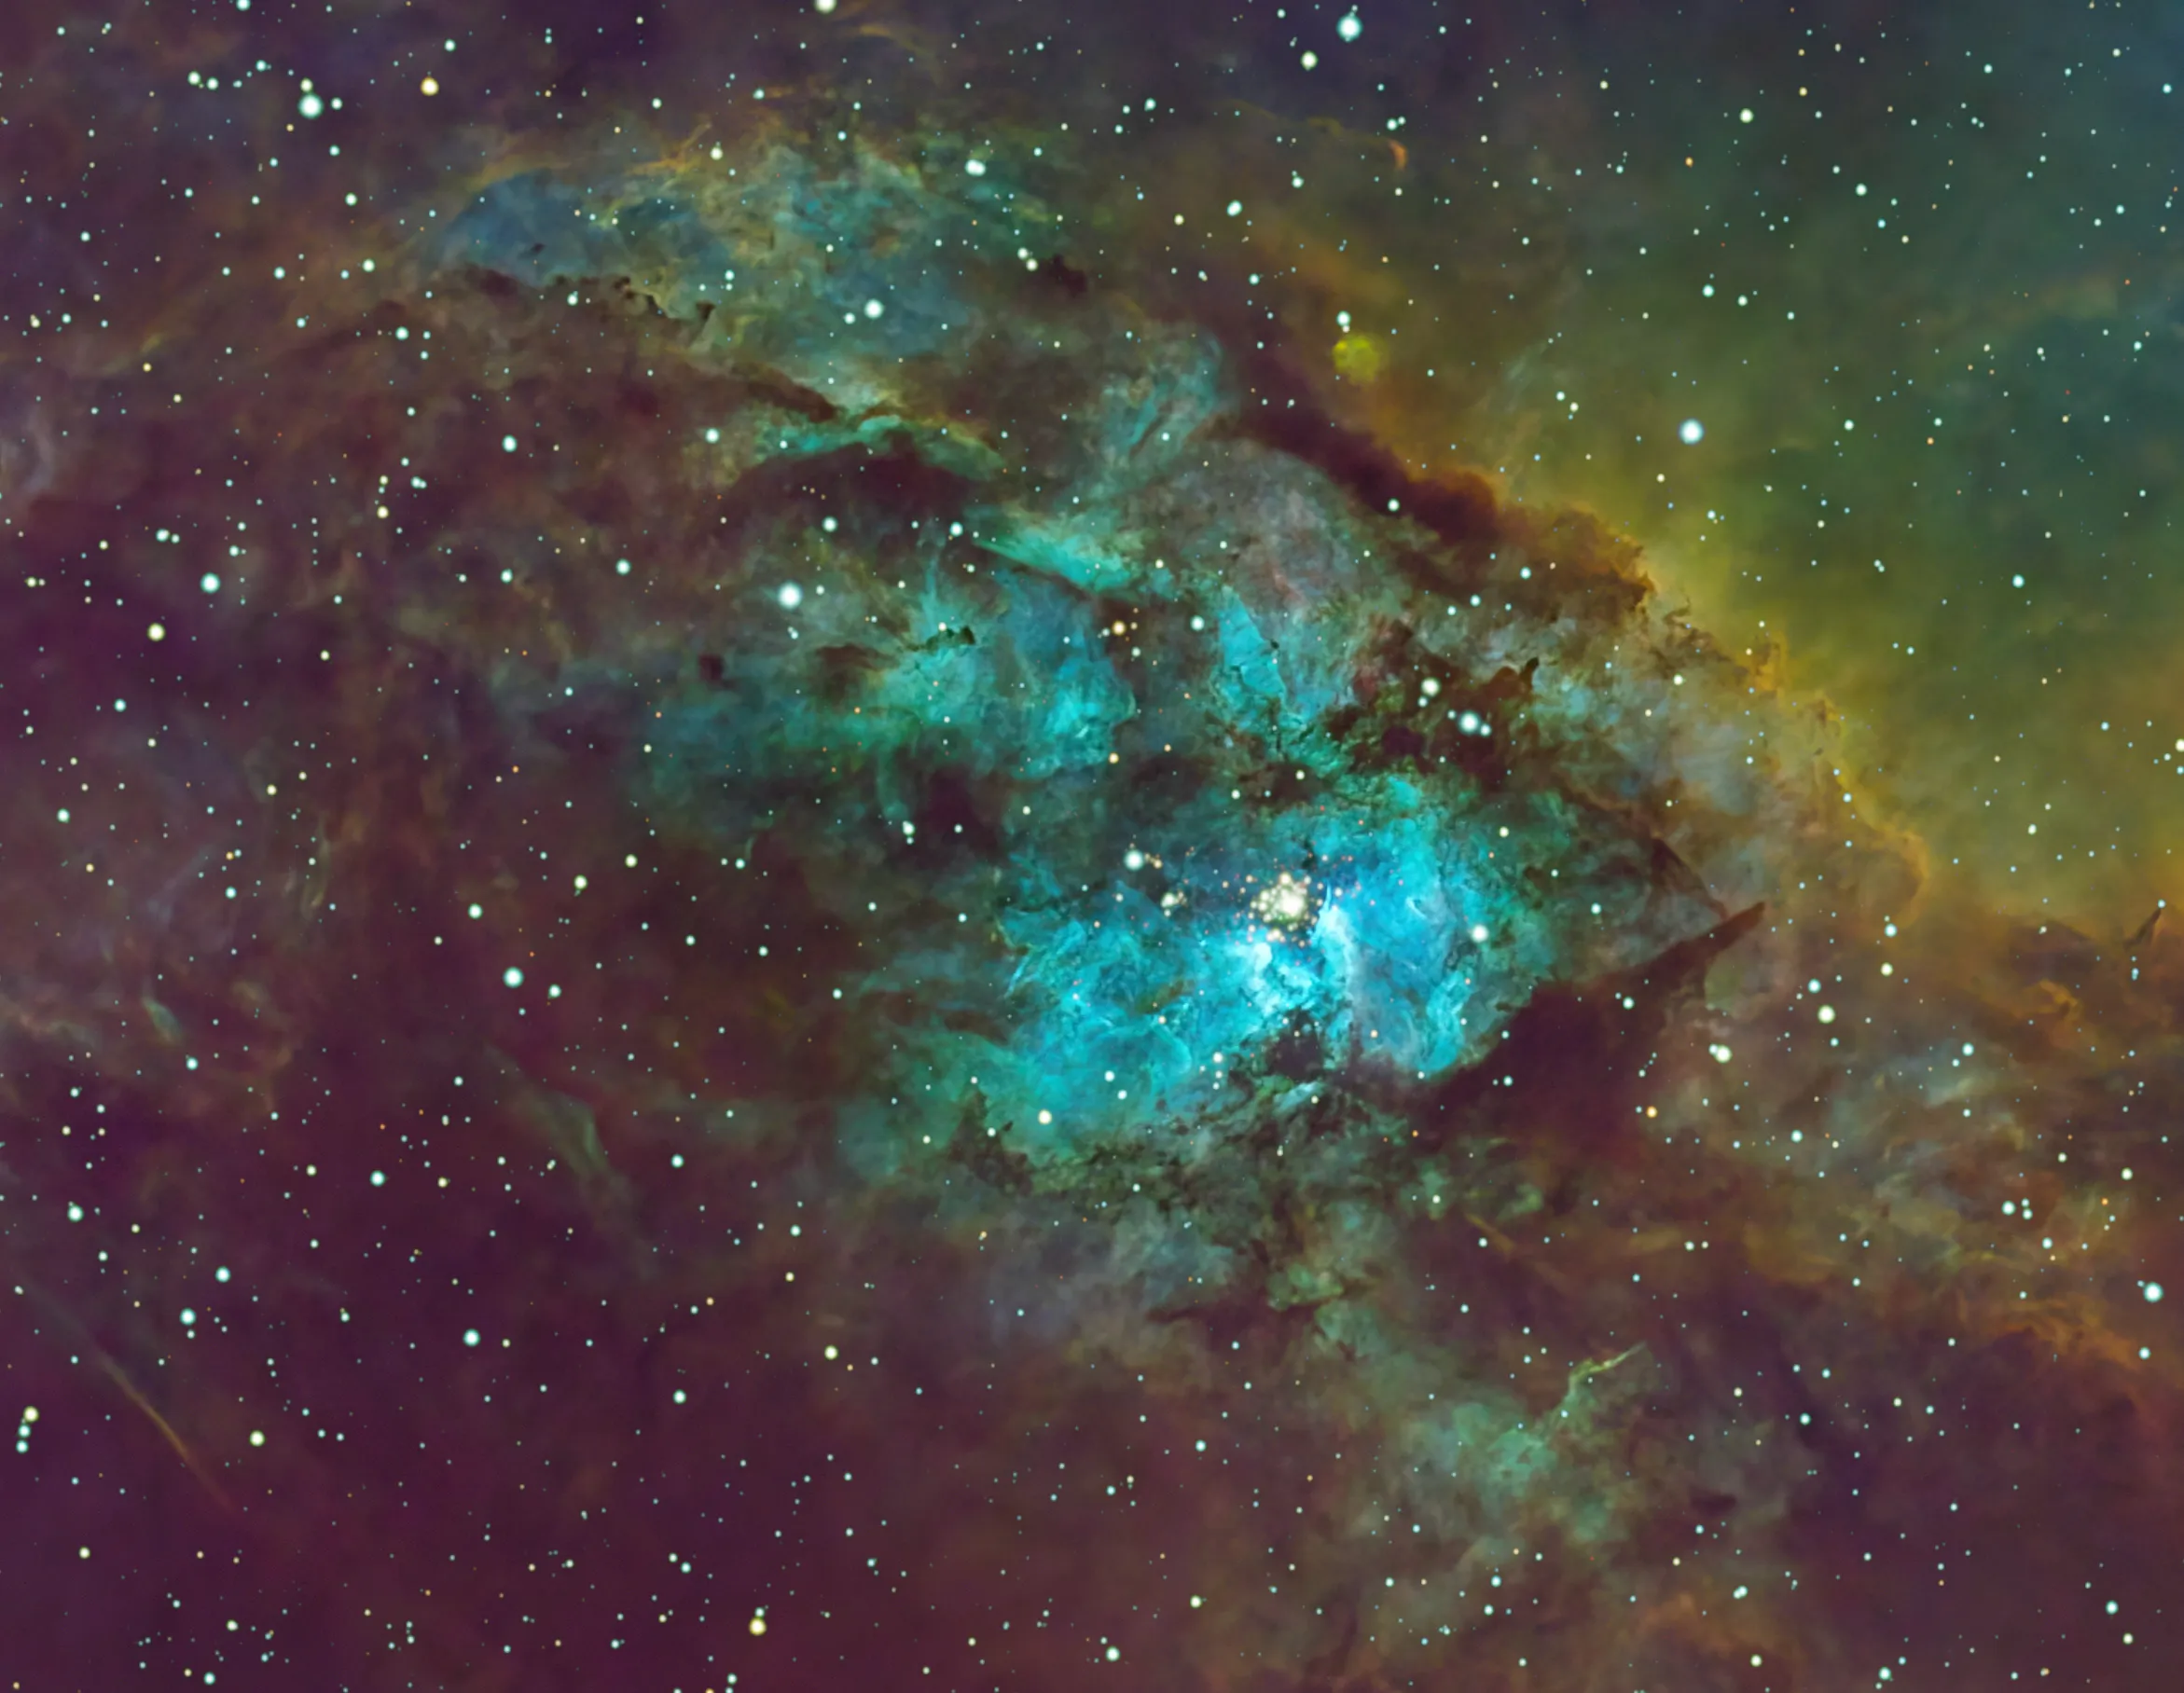 NGC 3603 is a nebula situated in the Carina–Sagittarius Arm of the Milky Way.